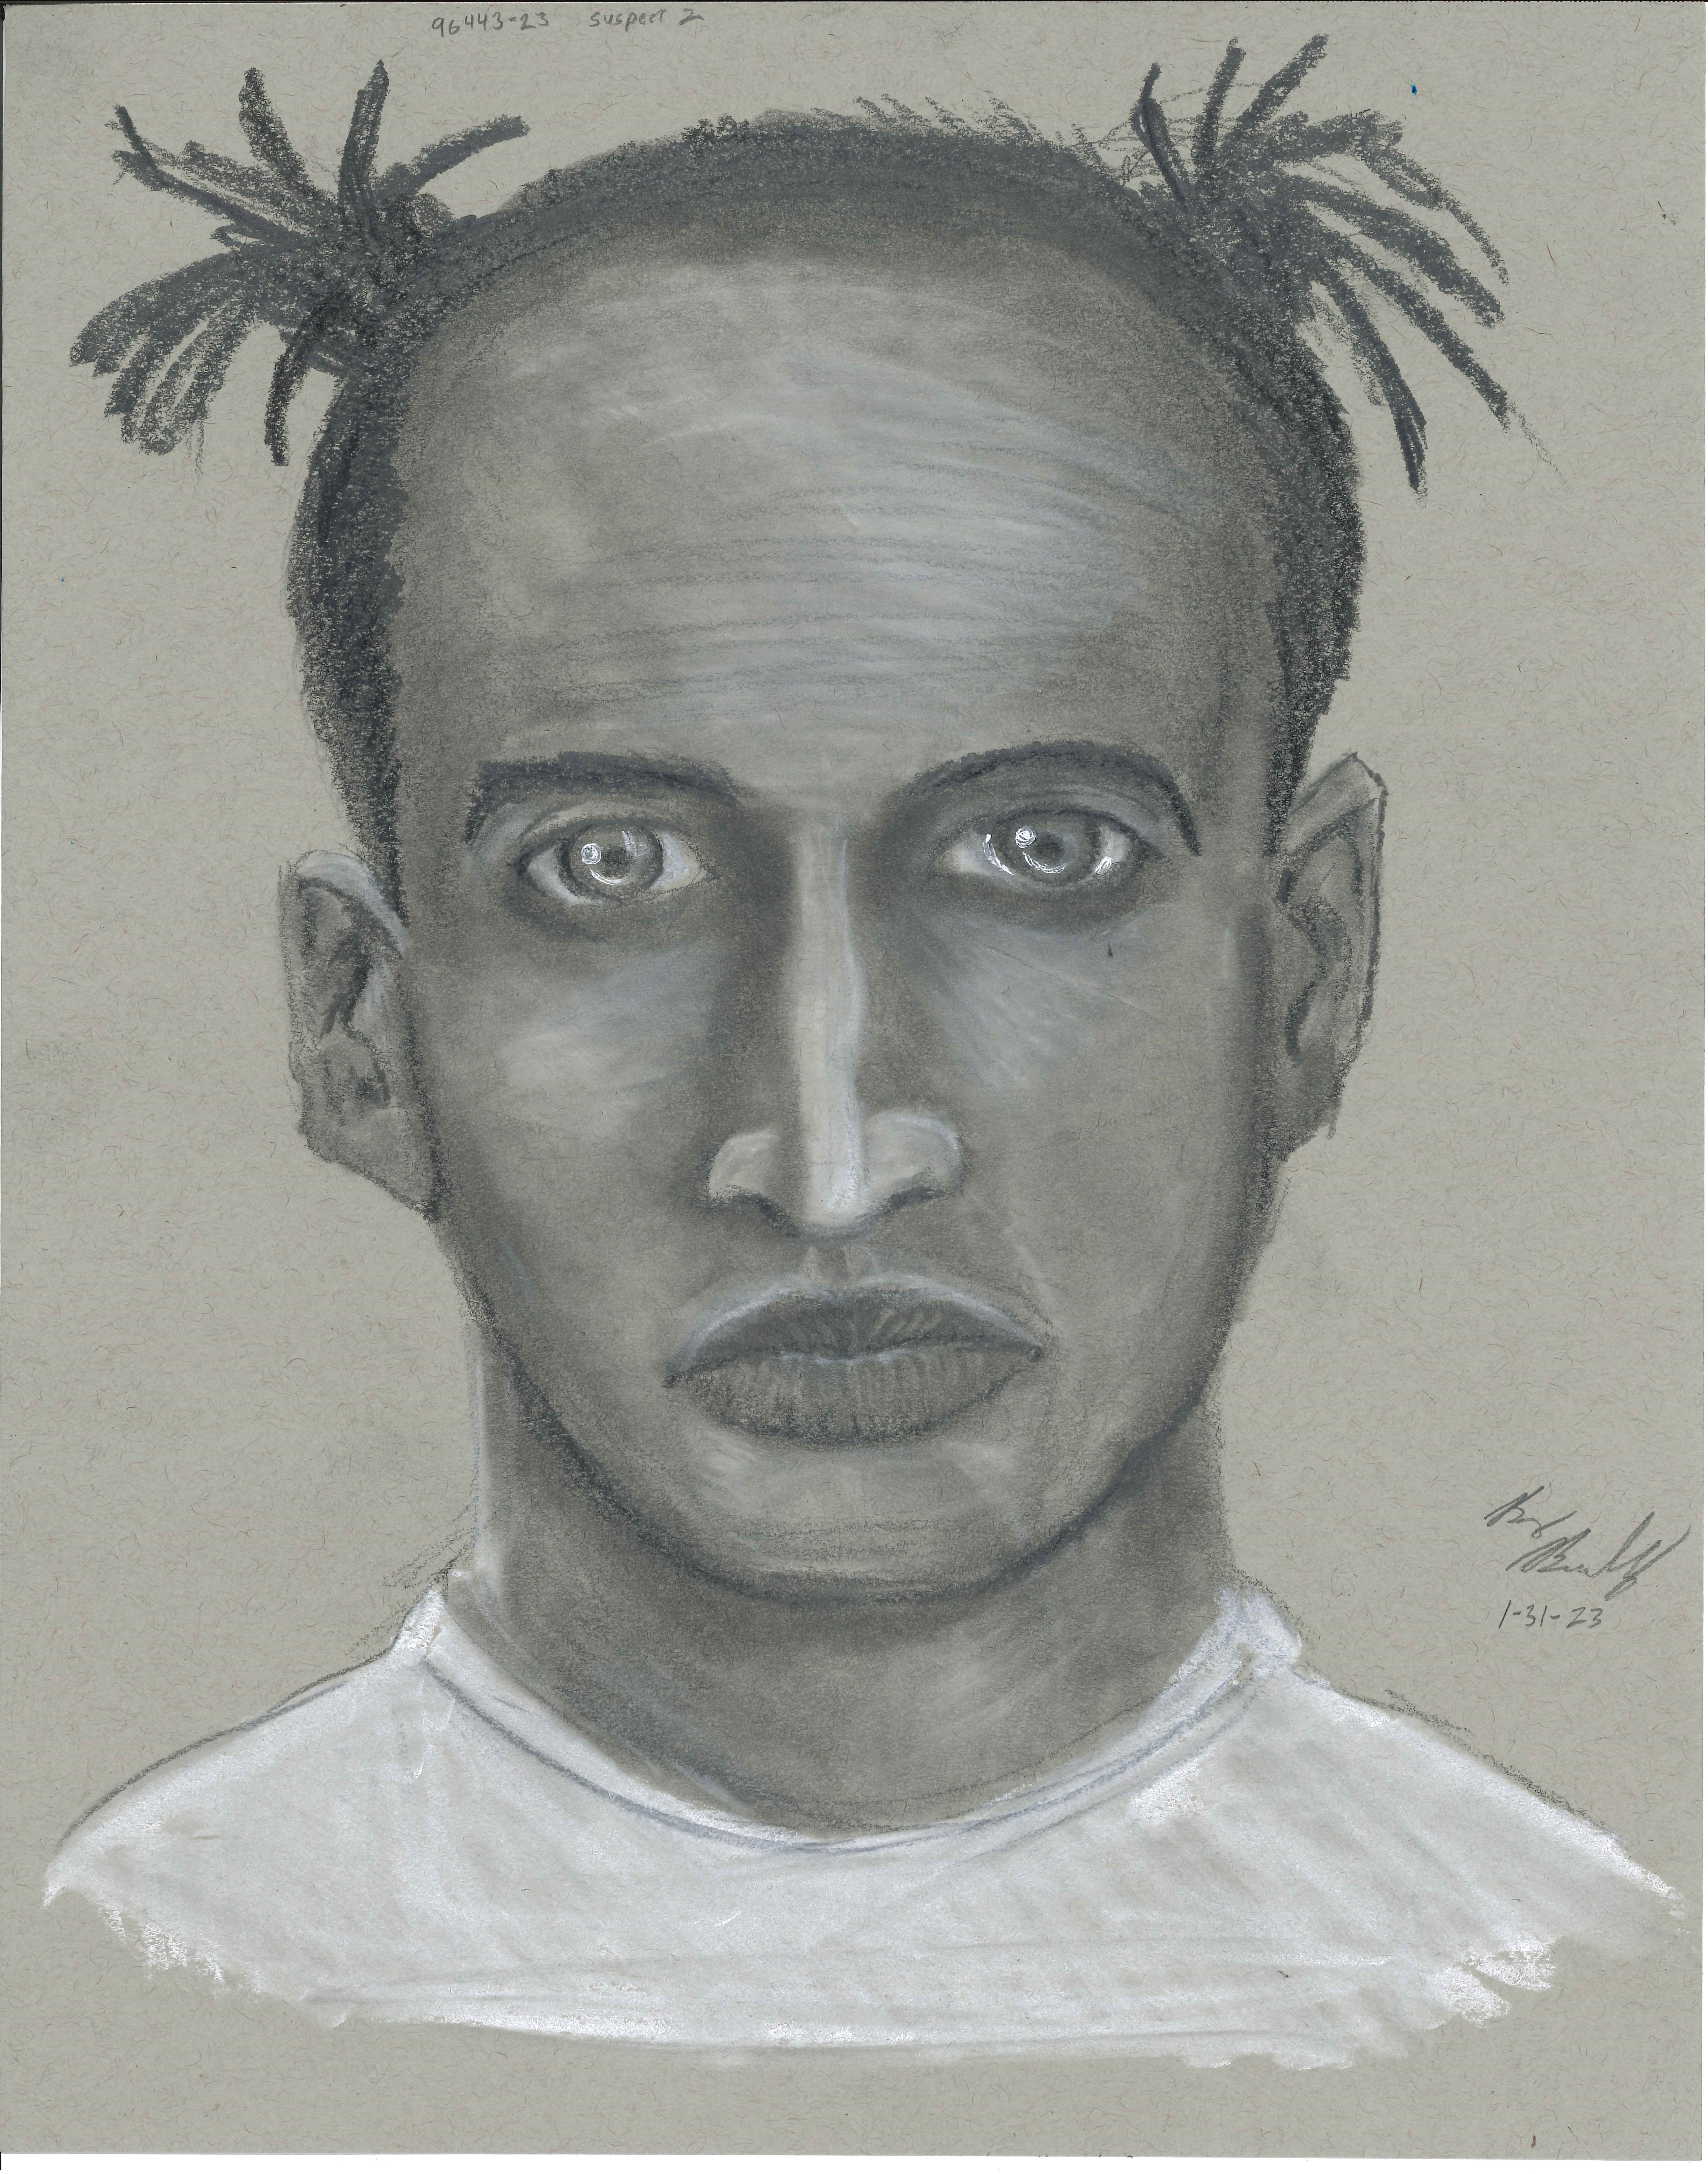 HPD 96443 23 Agg Sexual Assault @10500 S Wilcrest Dr. SUSPECT PHOTO1 Houston Crime Stoppers